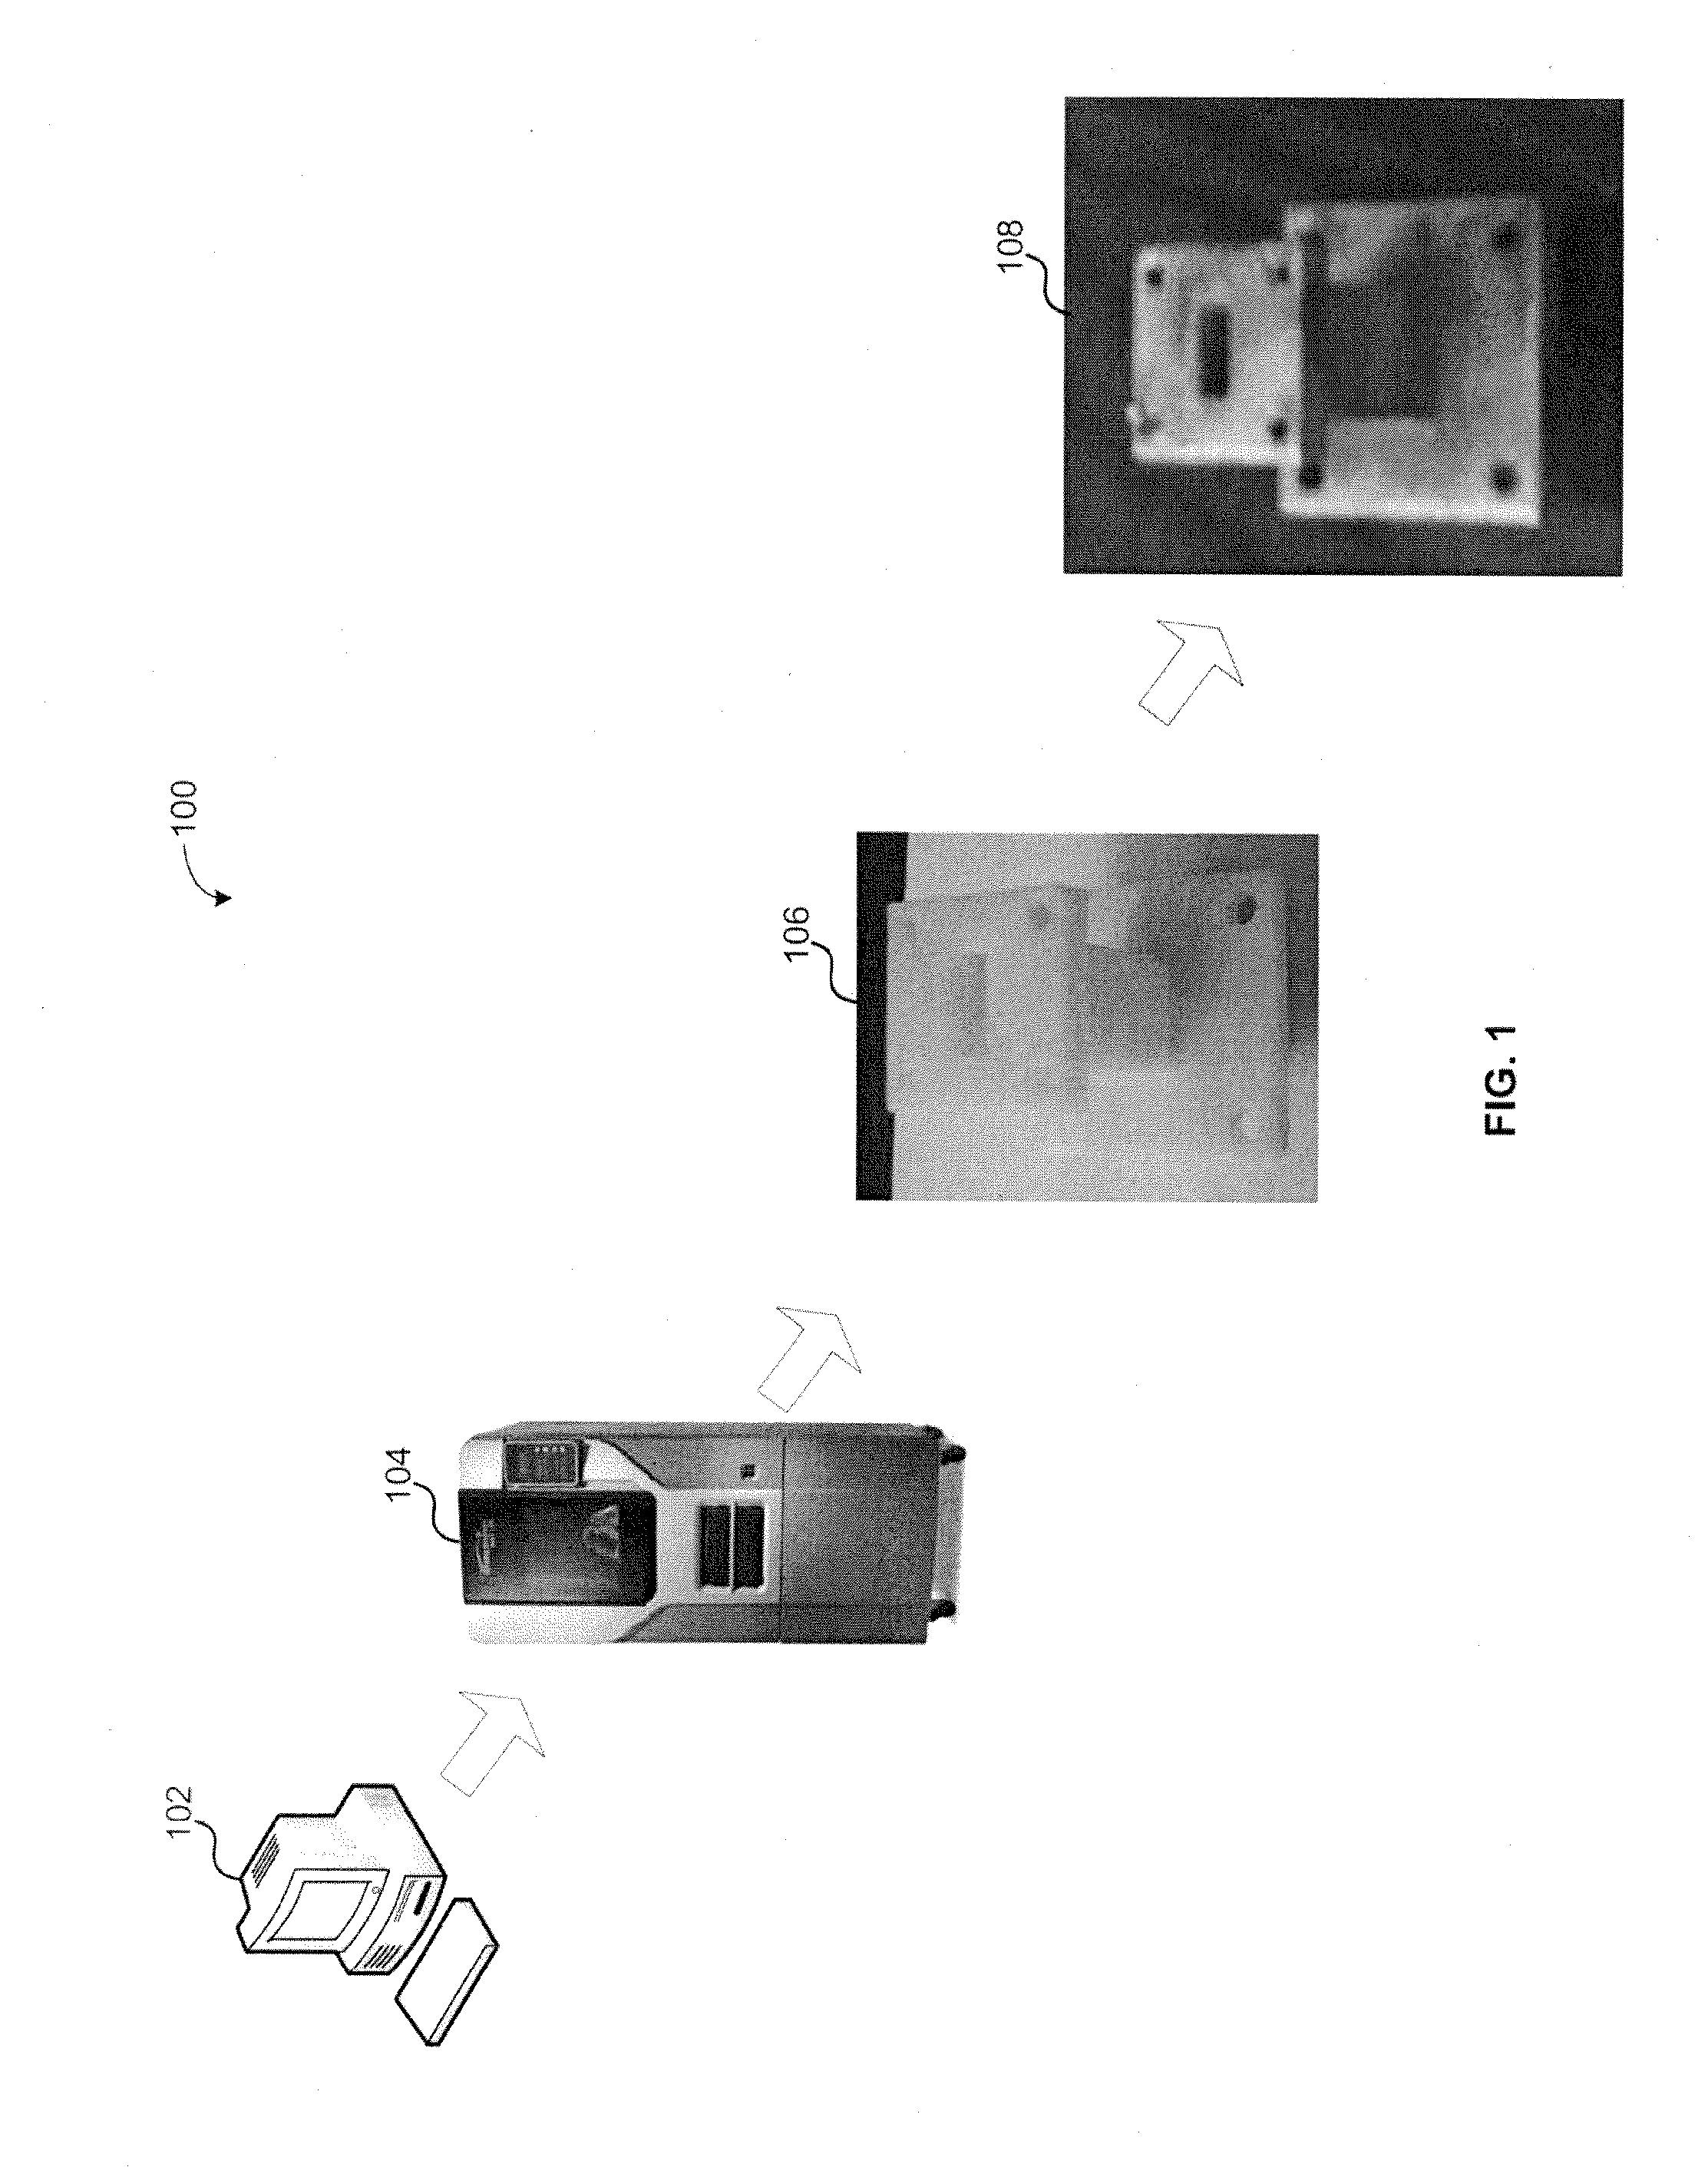 Systems and methods for manufacturing passive waveguide components